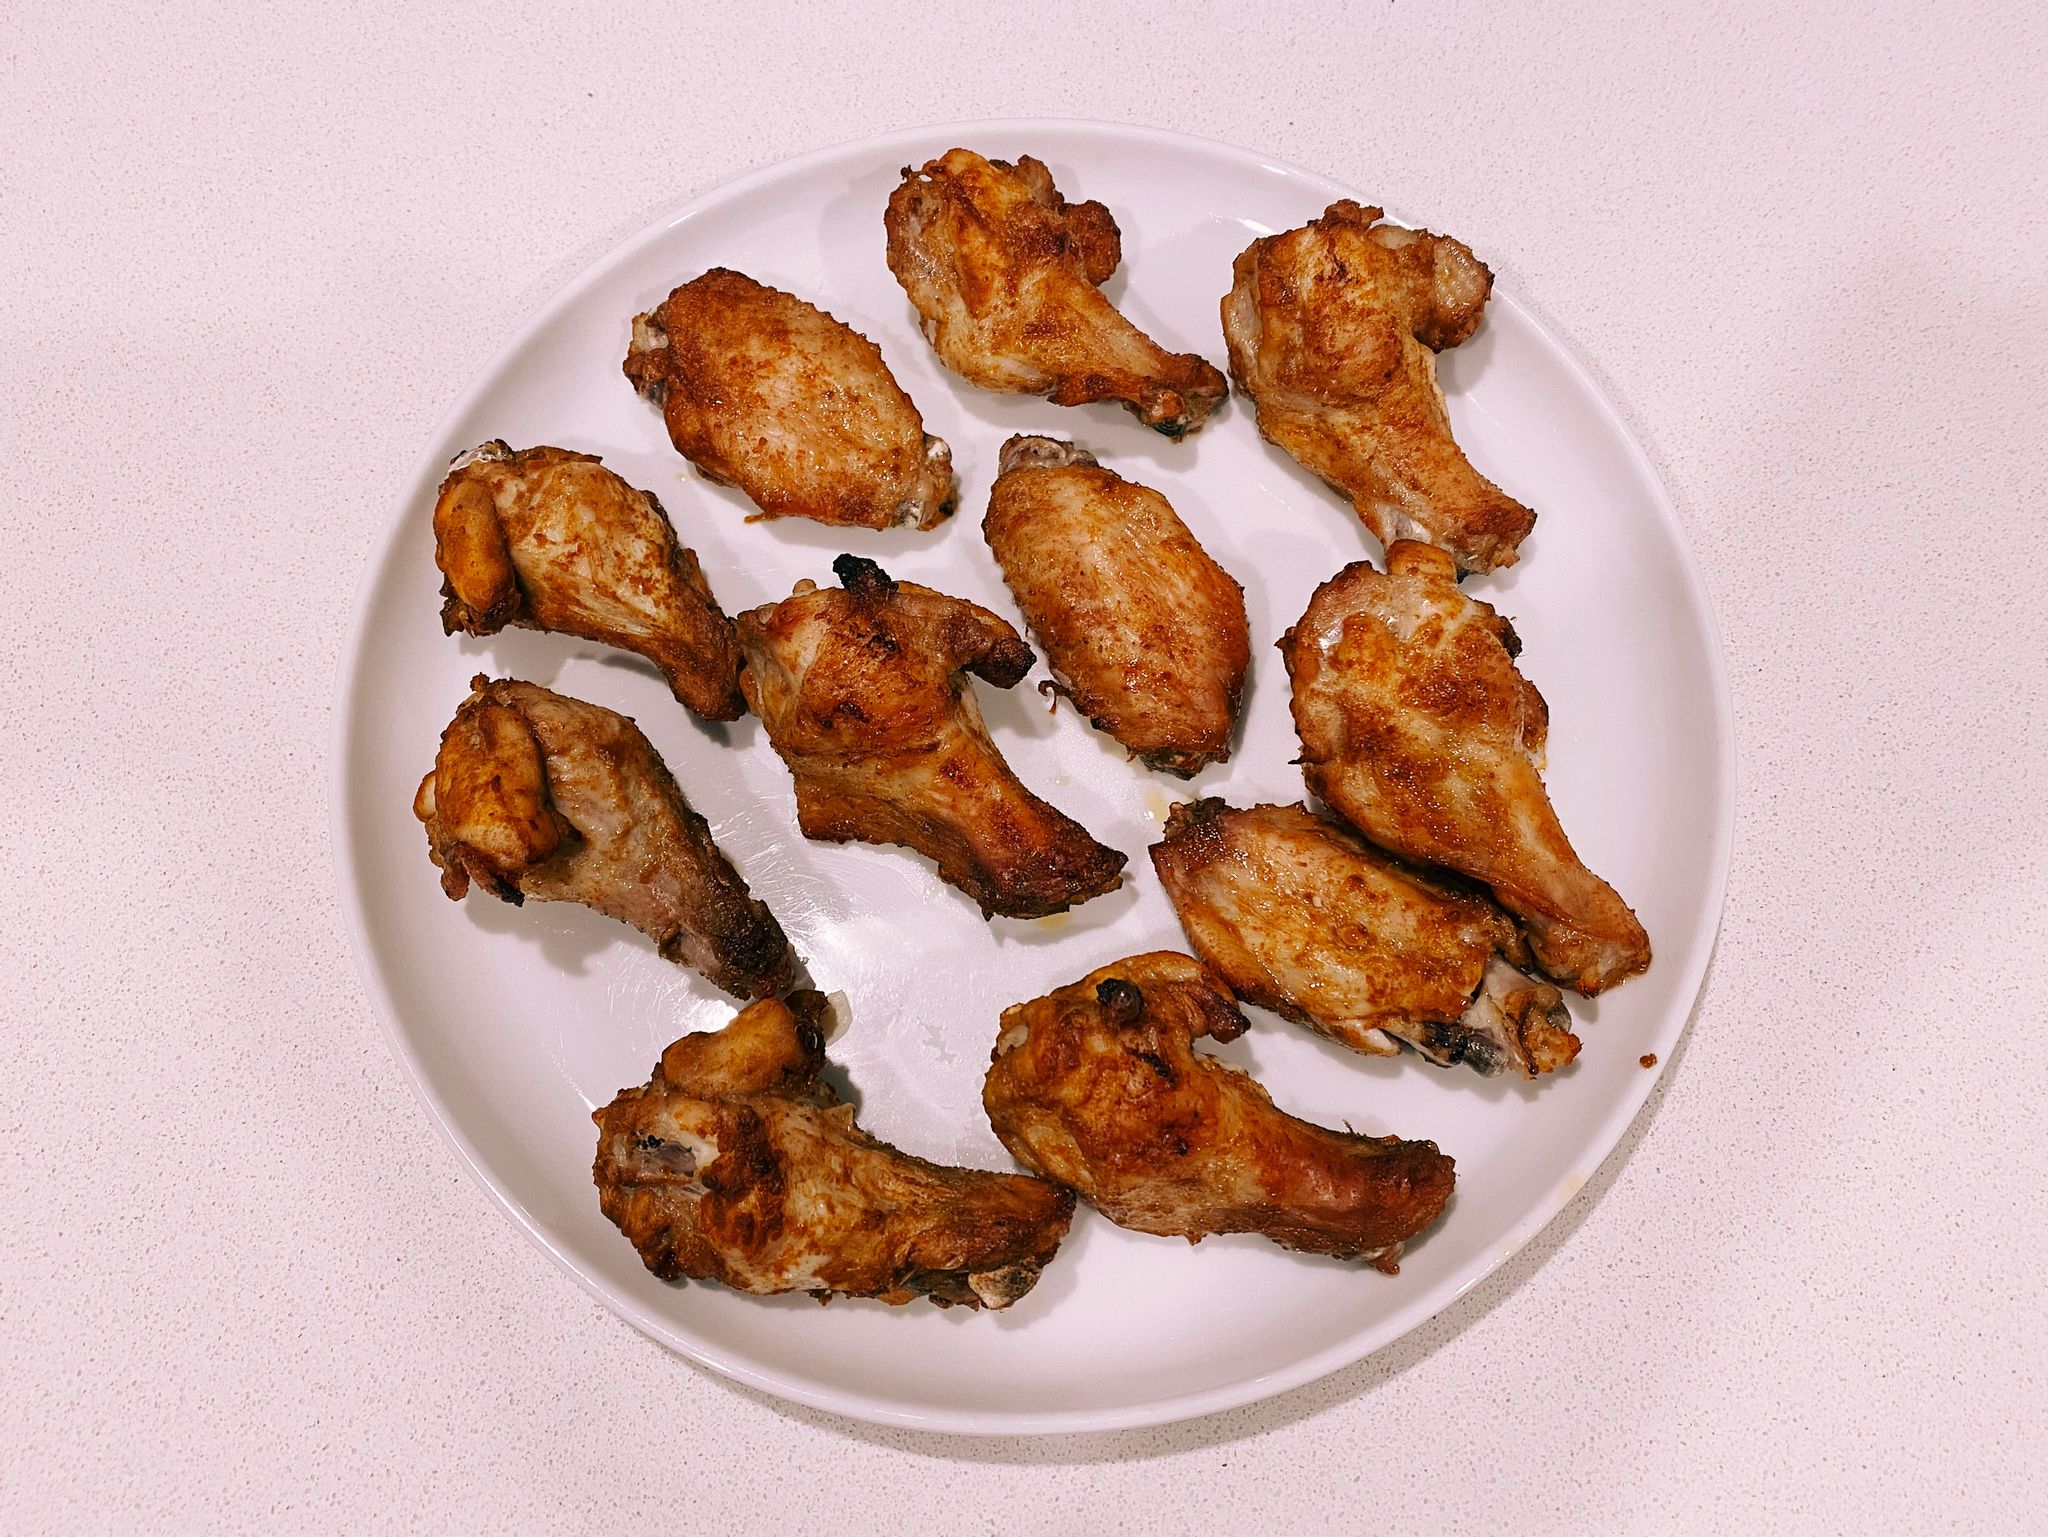 A photo of a plate with delicious-looking chicken wings on it.